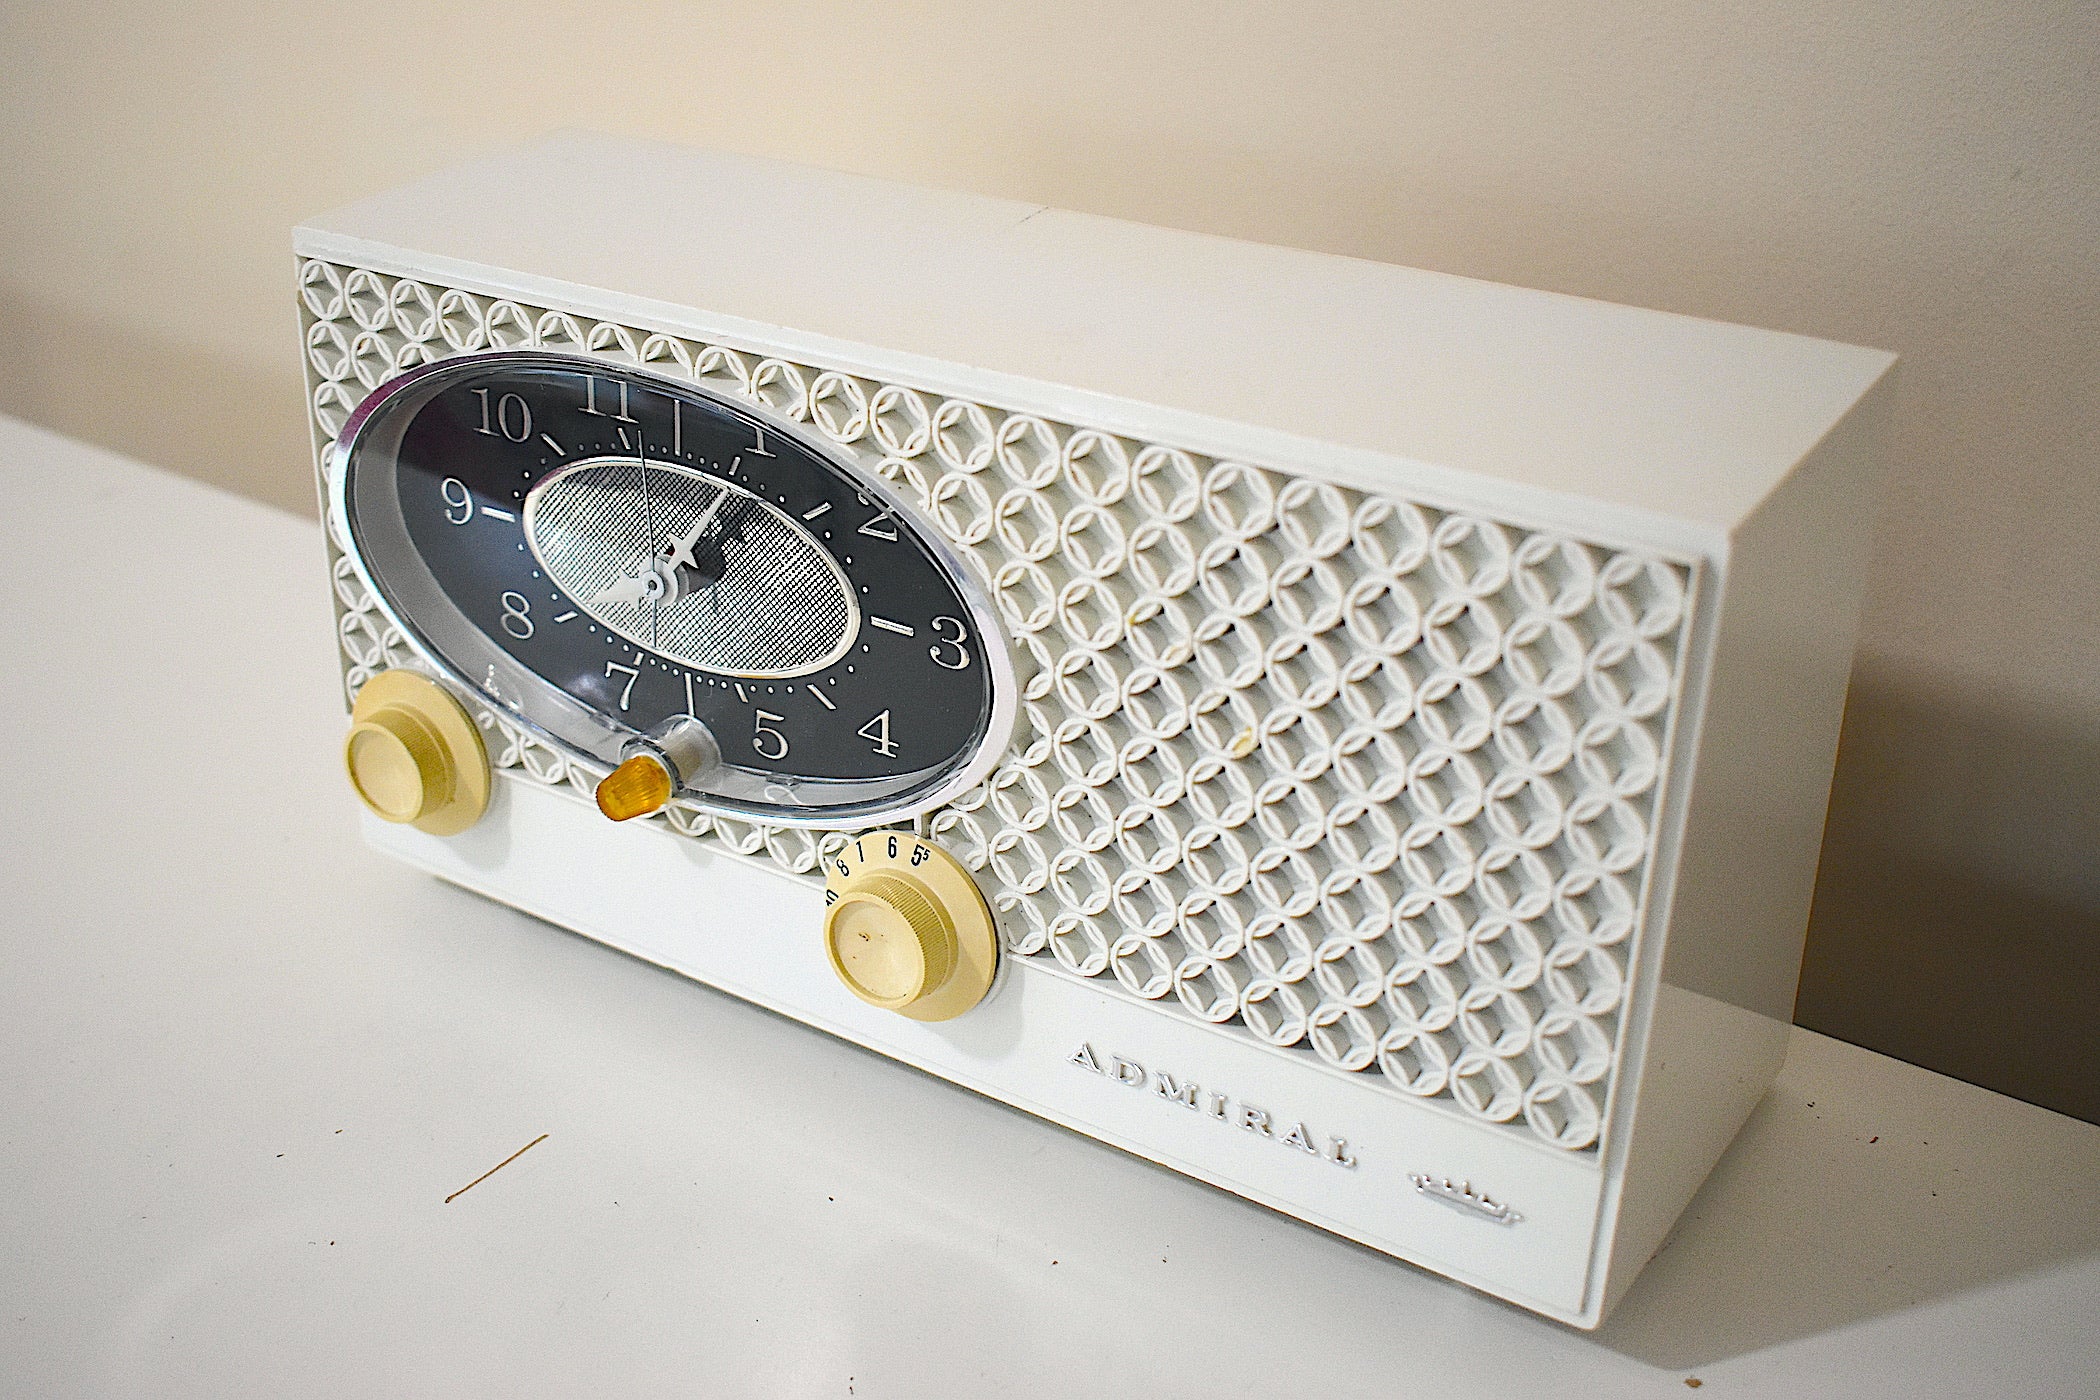 Bluetooth Ready To Go - Breezeway White 1964 Admiral 'Duet' Model Y3353 AM Vacuum Tube Clock Radio Works Great!